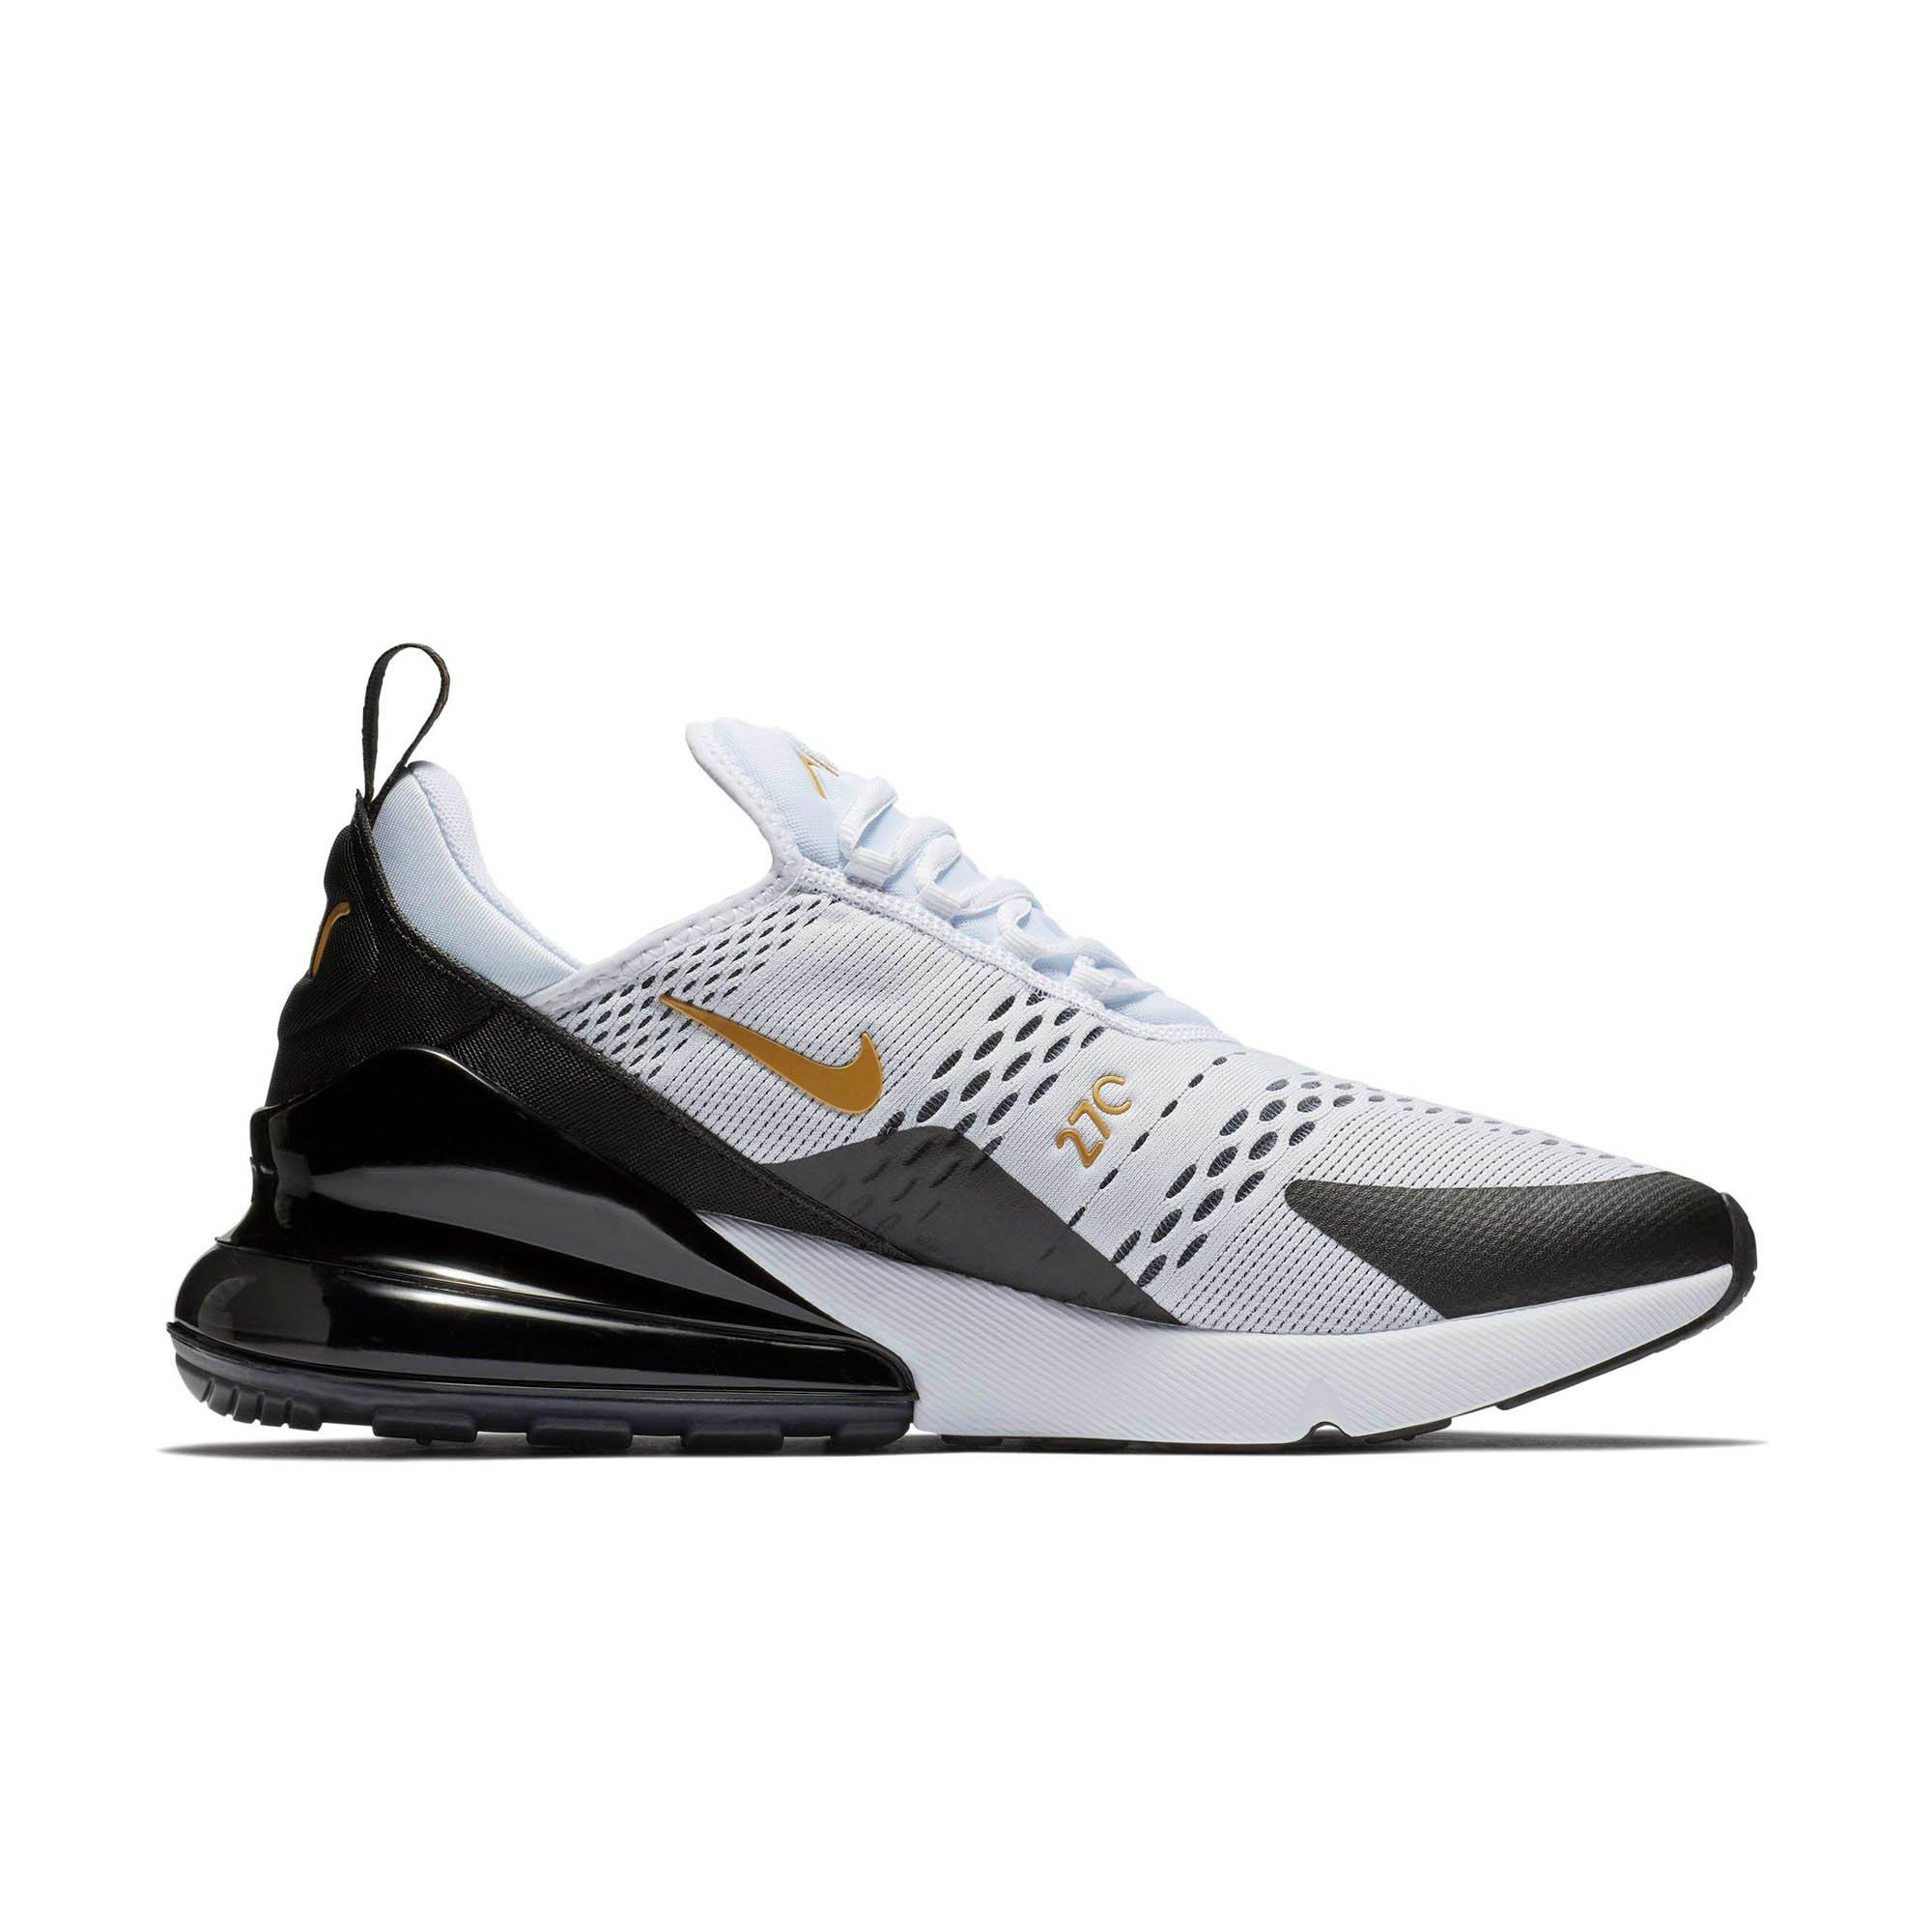 nike air max 270 in black and white